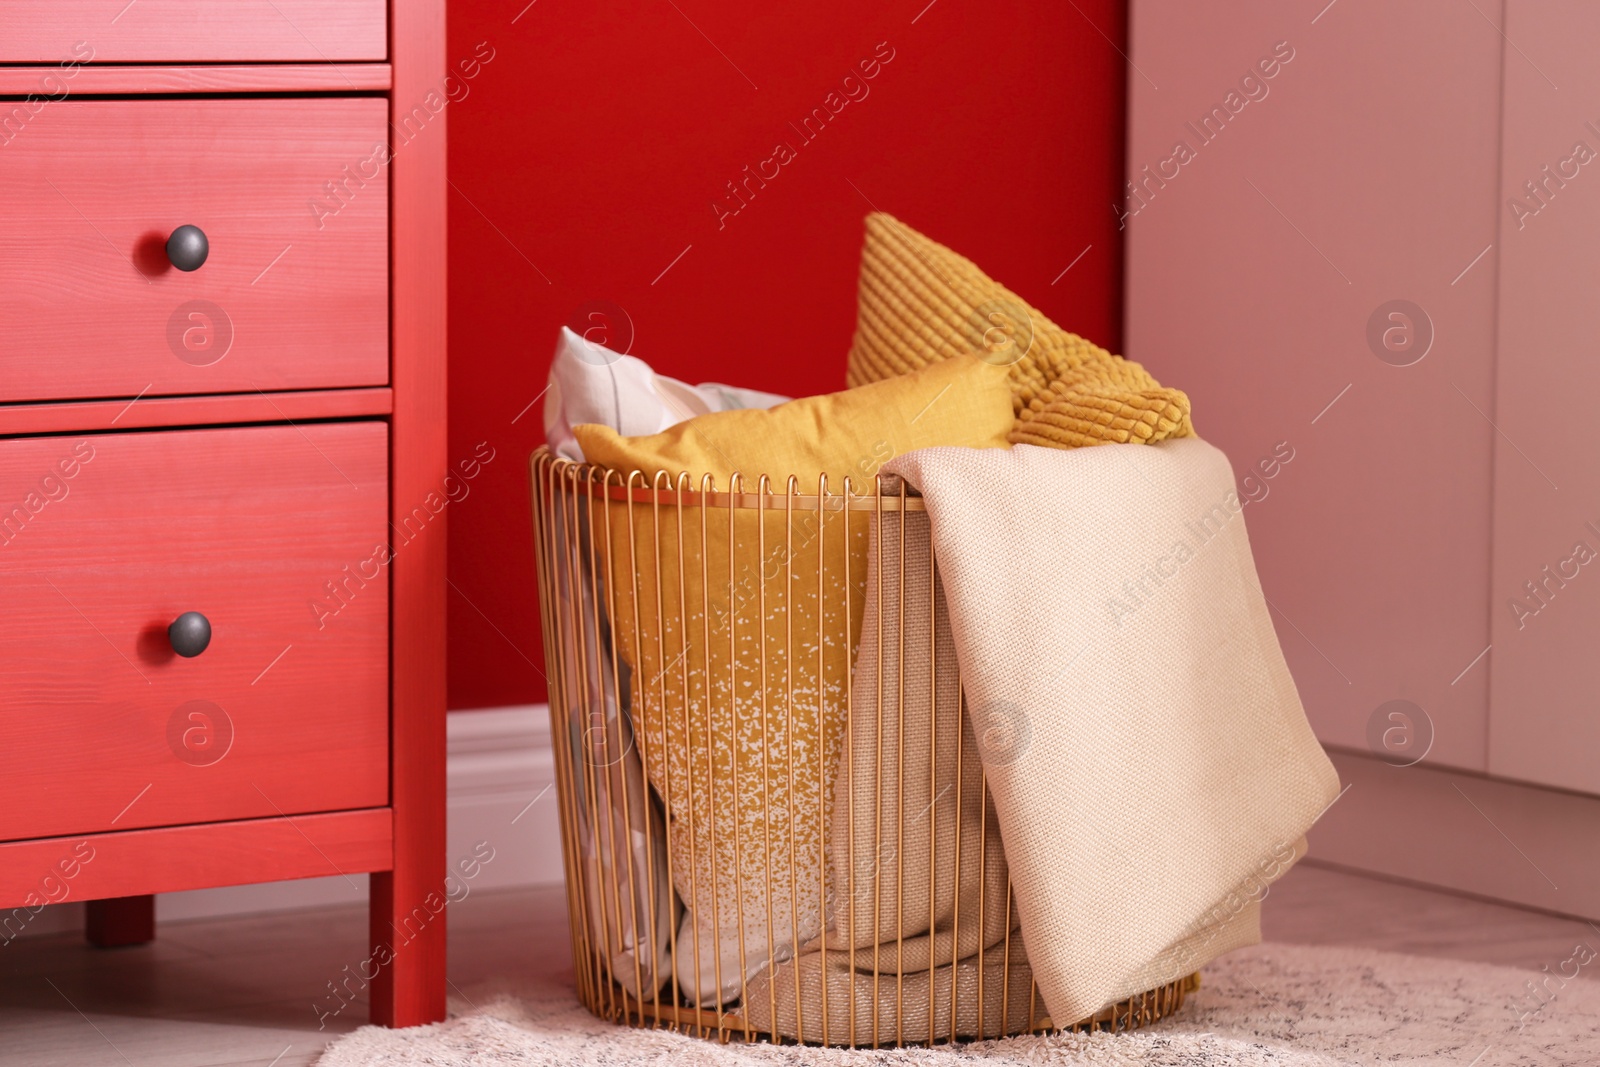 Photo of Basket with blanket and pillows near red wall indoors